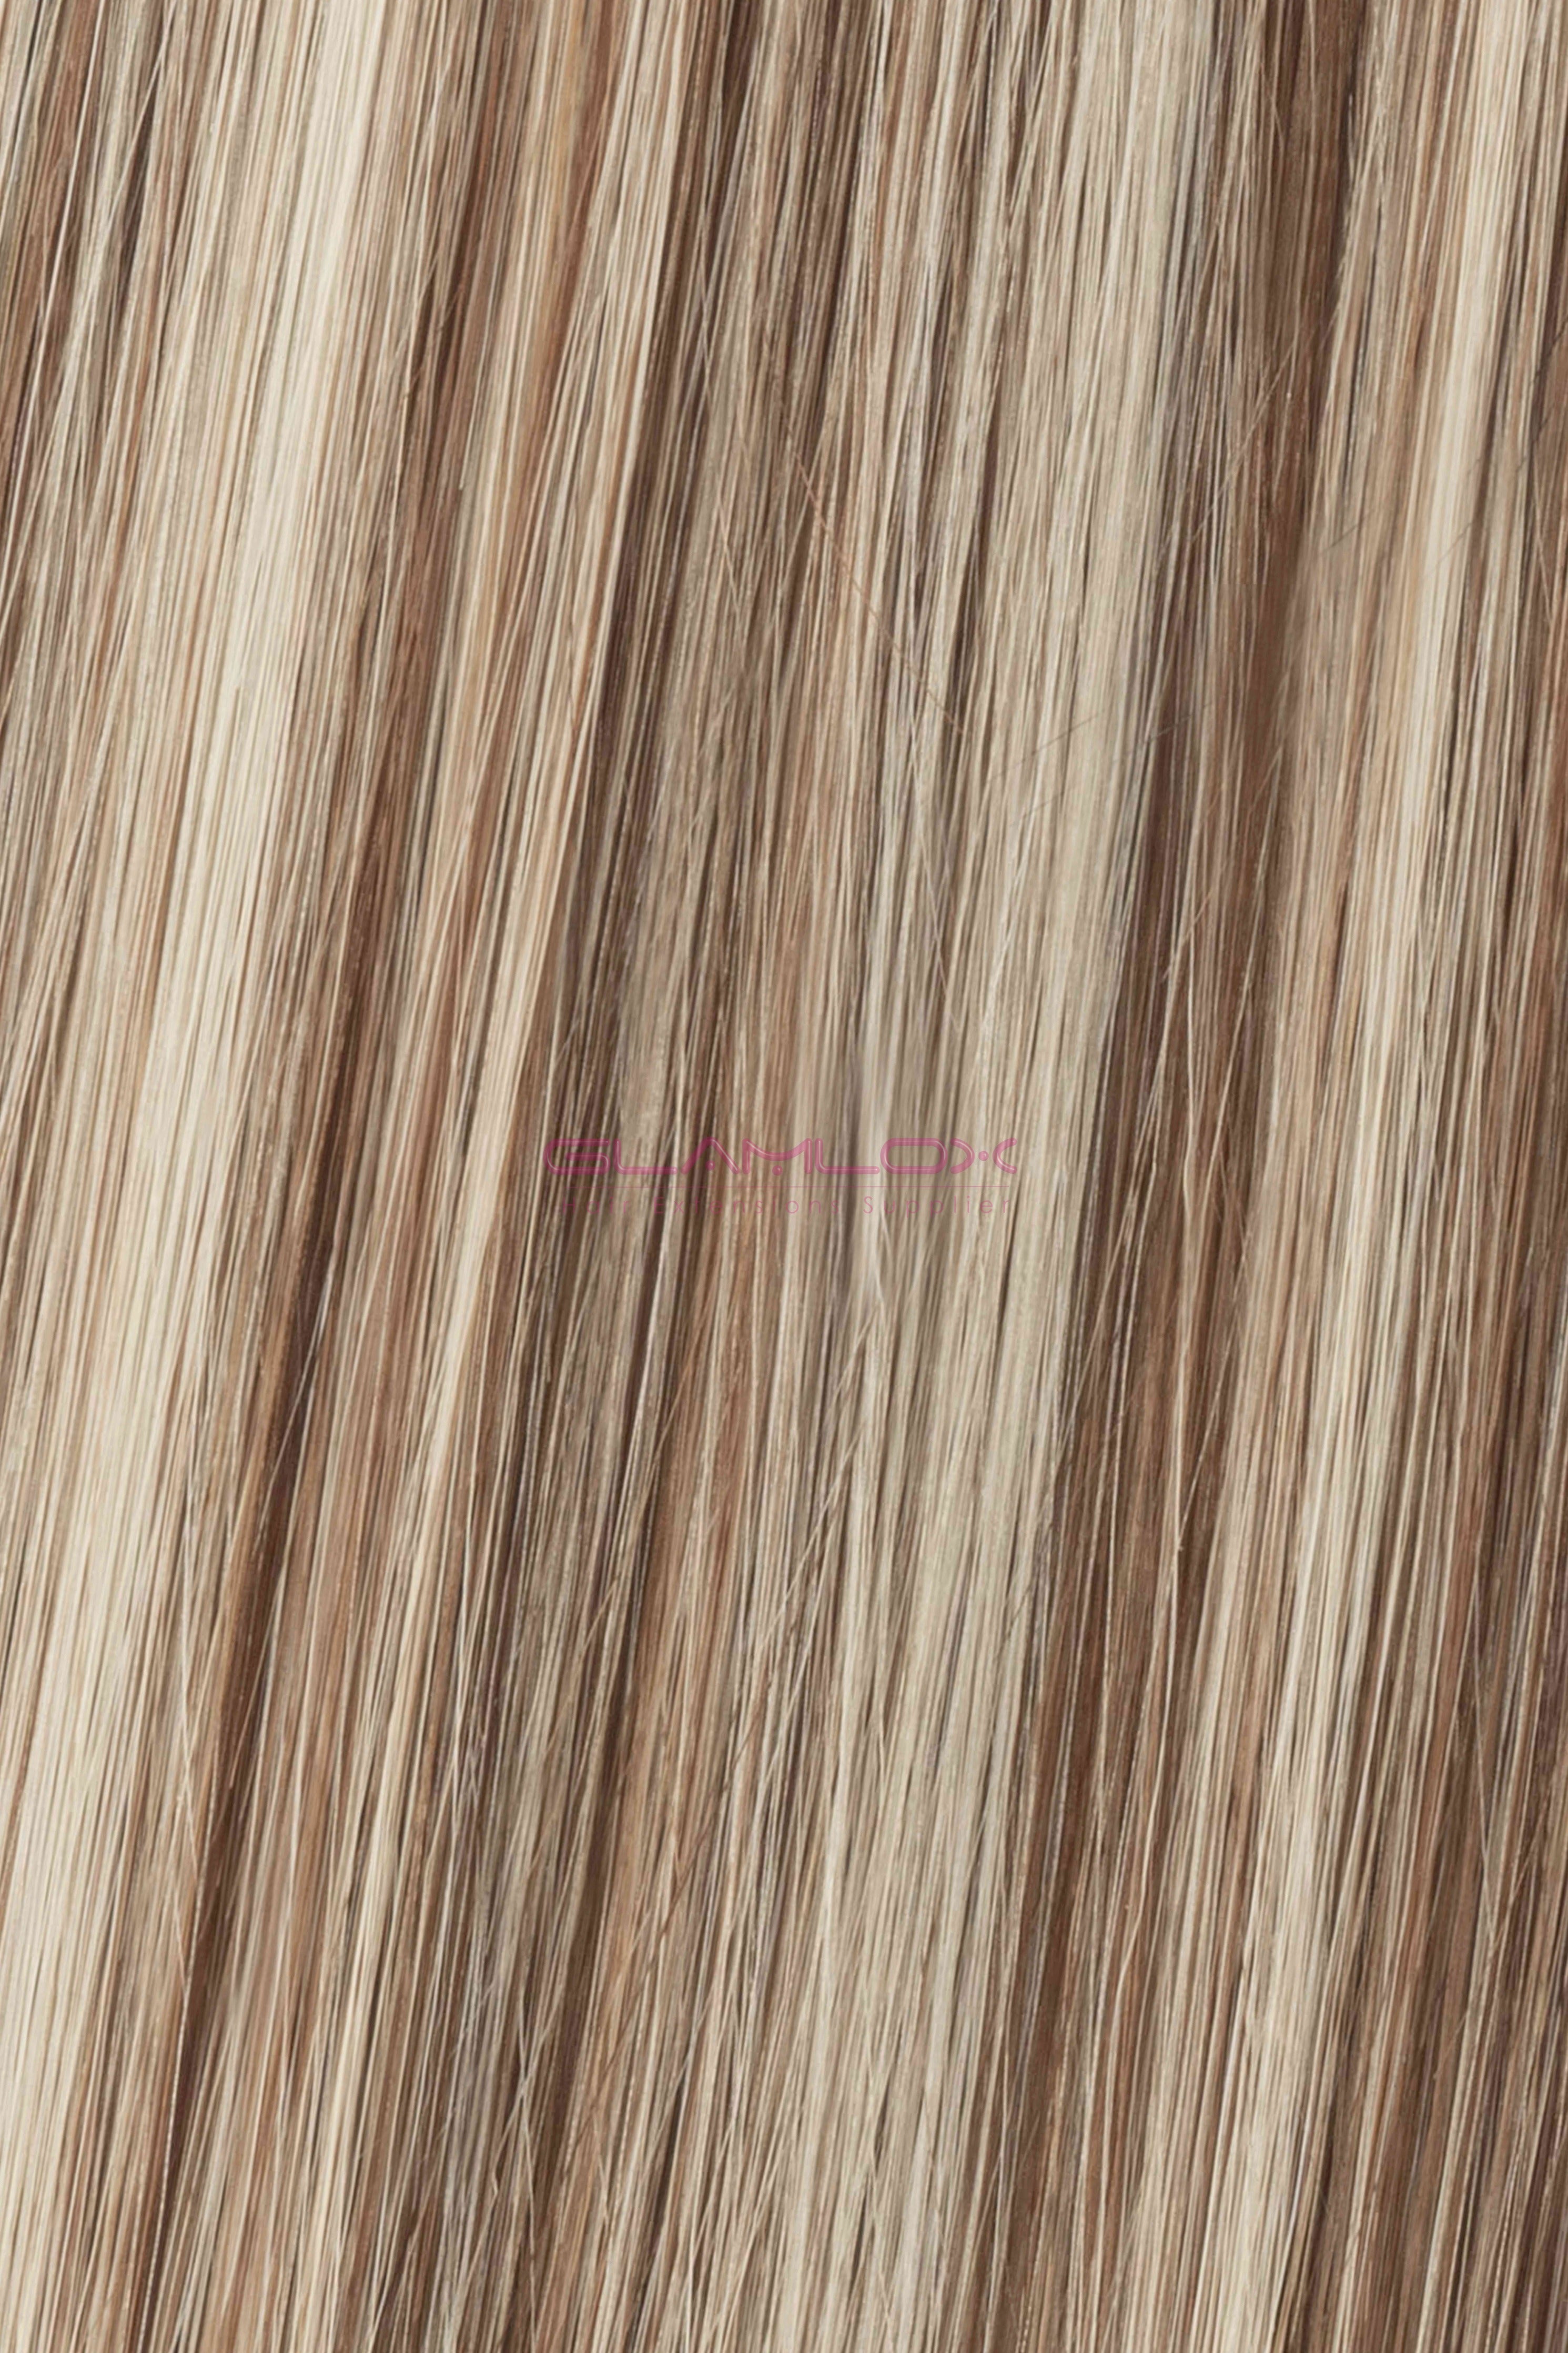 26" Nano Ring Hair Extensions - Russian Mongolian Double Drawn Remy Human Hair  - 20 Strands